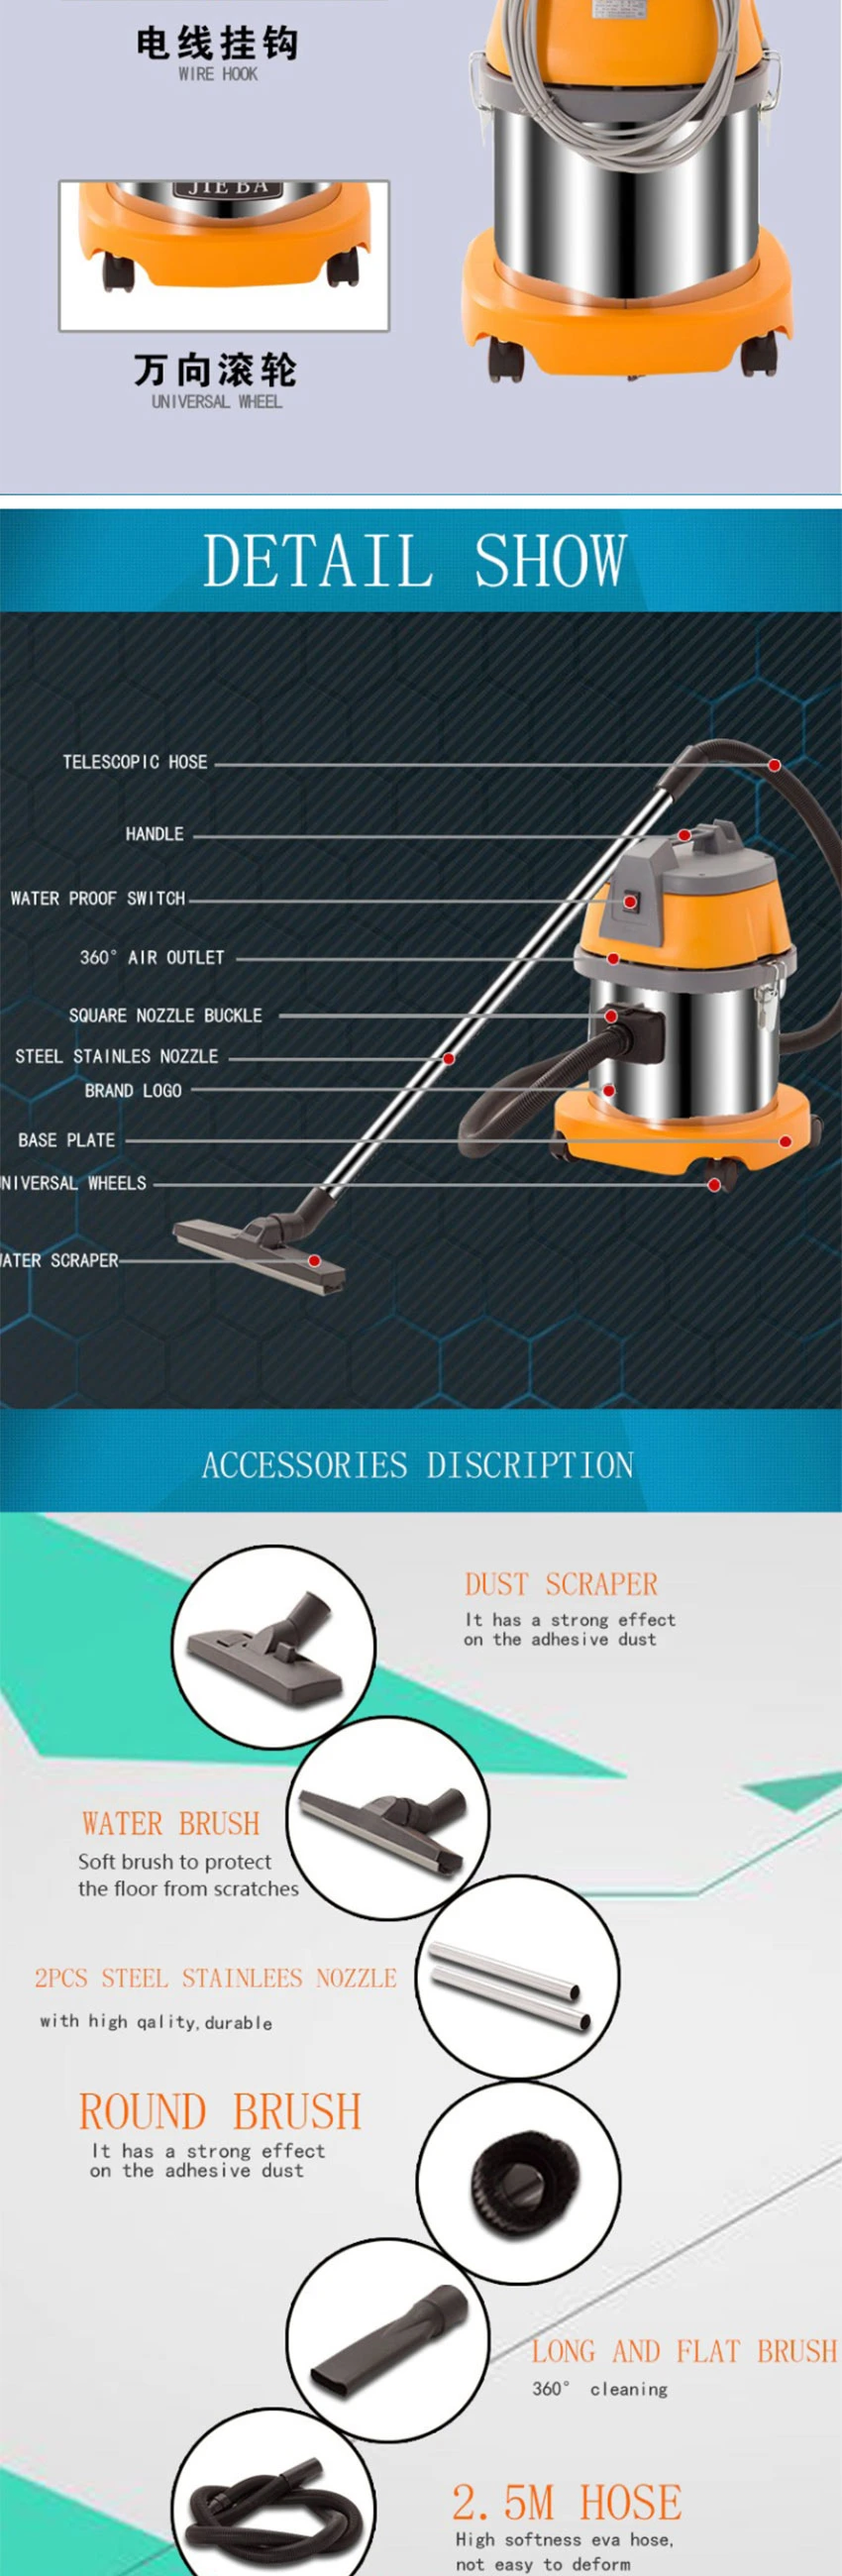 Commercial Wet and Dry Vacuum Cleaner 15L Ss Tank for Home Concrete Carpet Floor Printer Cleaning